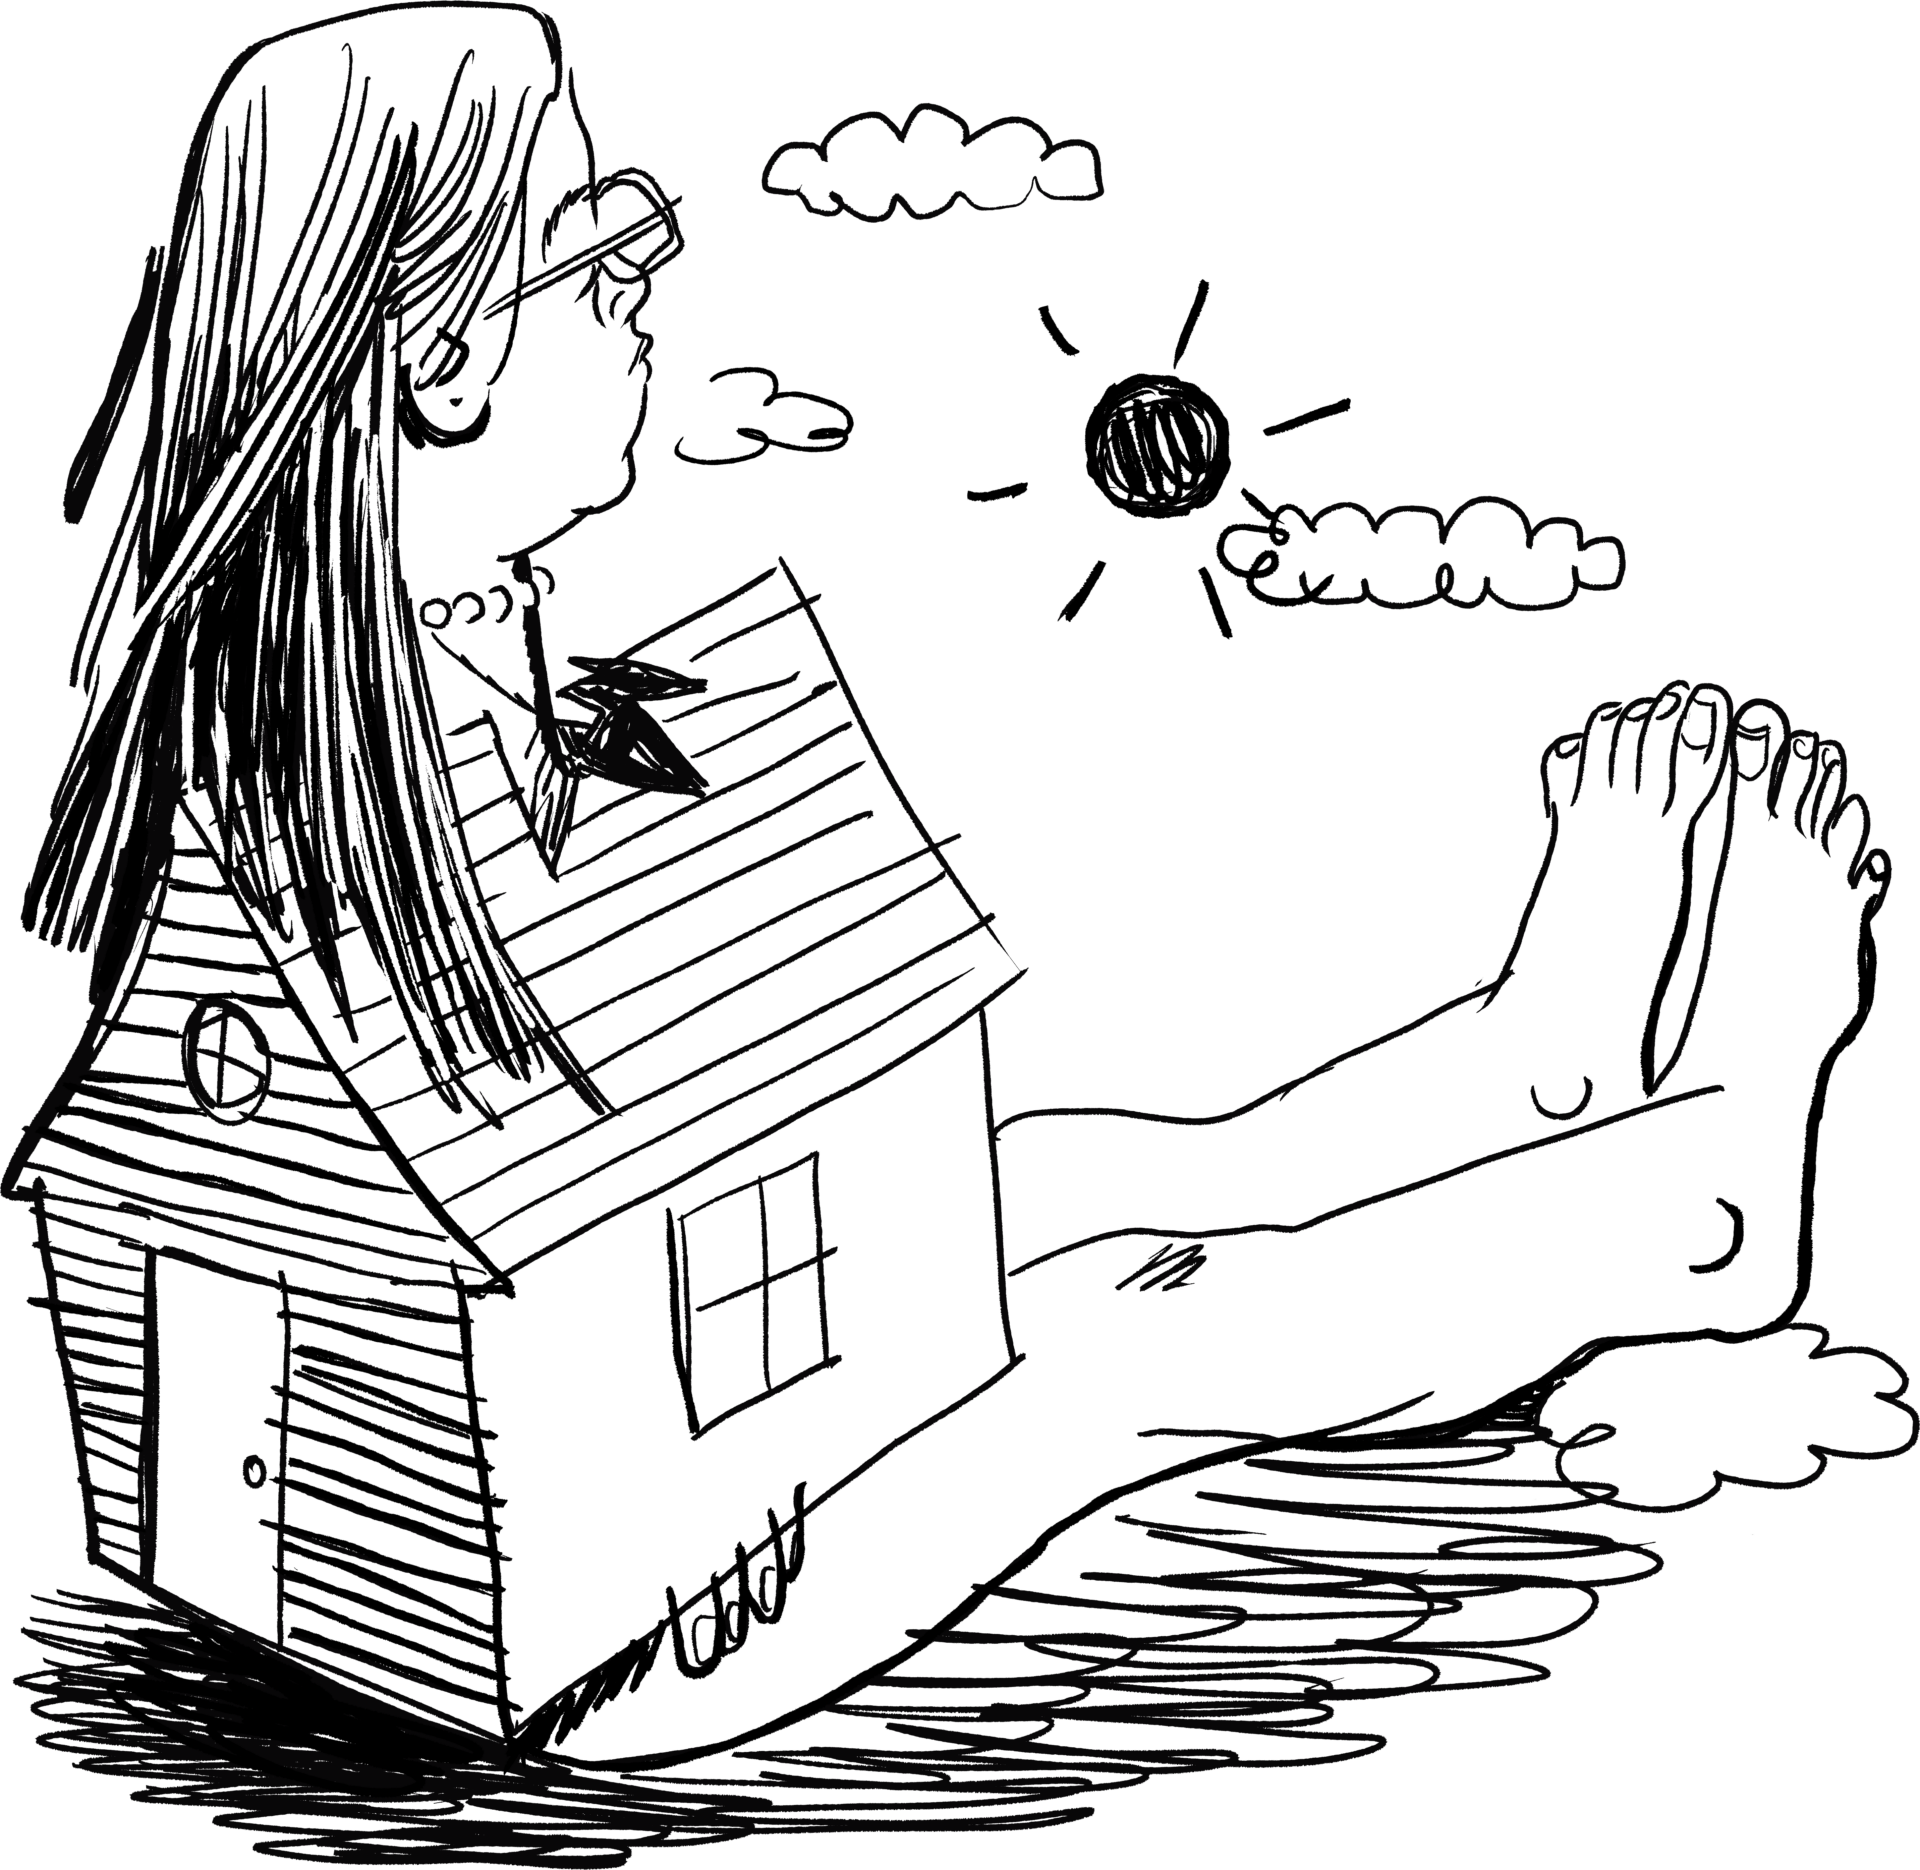 A woman takes shelter in a house. just big enough to cover her torso, her head sticking out of a hole in the roof. Her legs lay bare outside of the house as she watches the clouds float by.